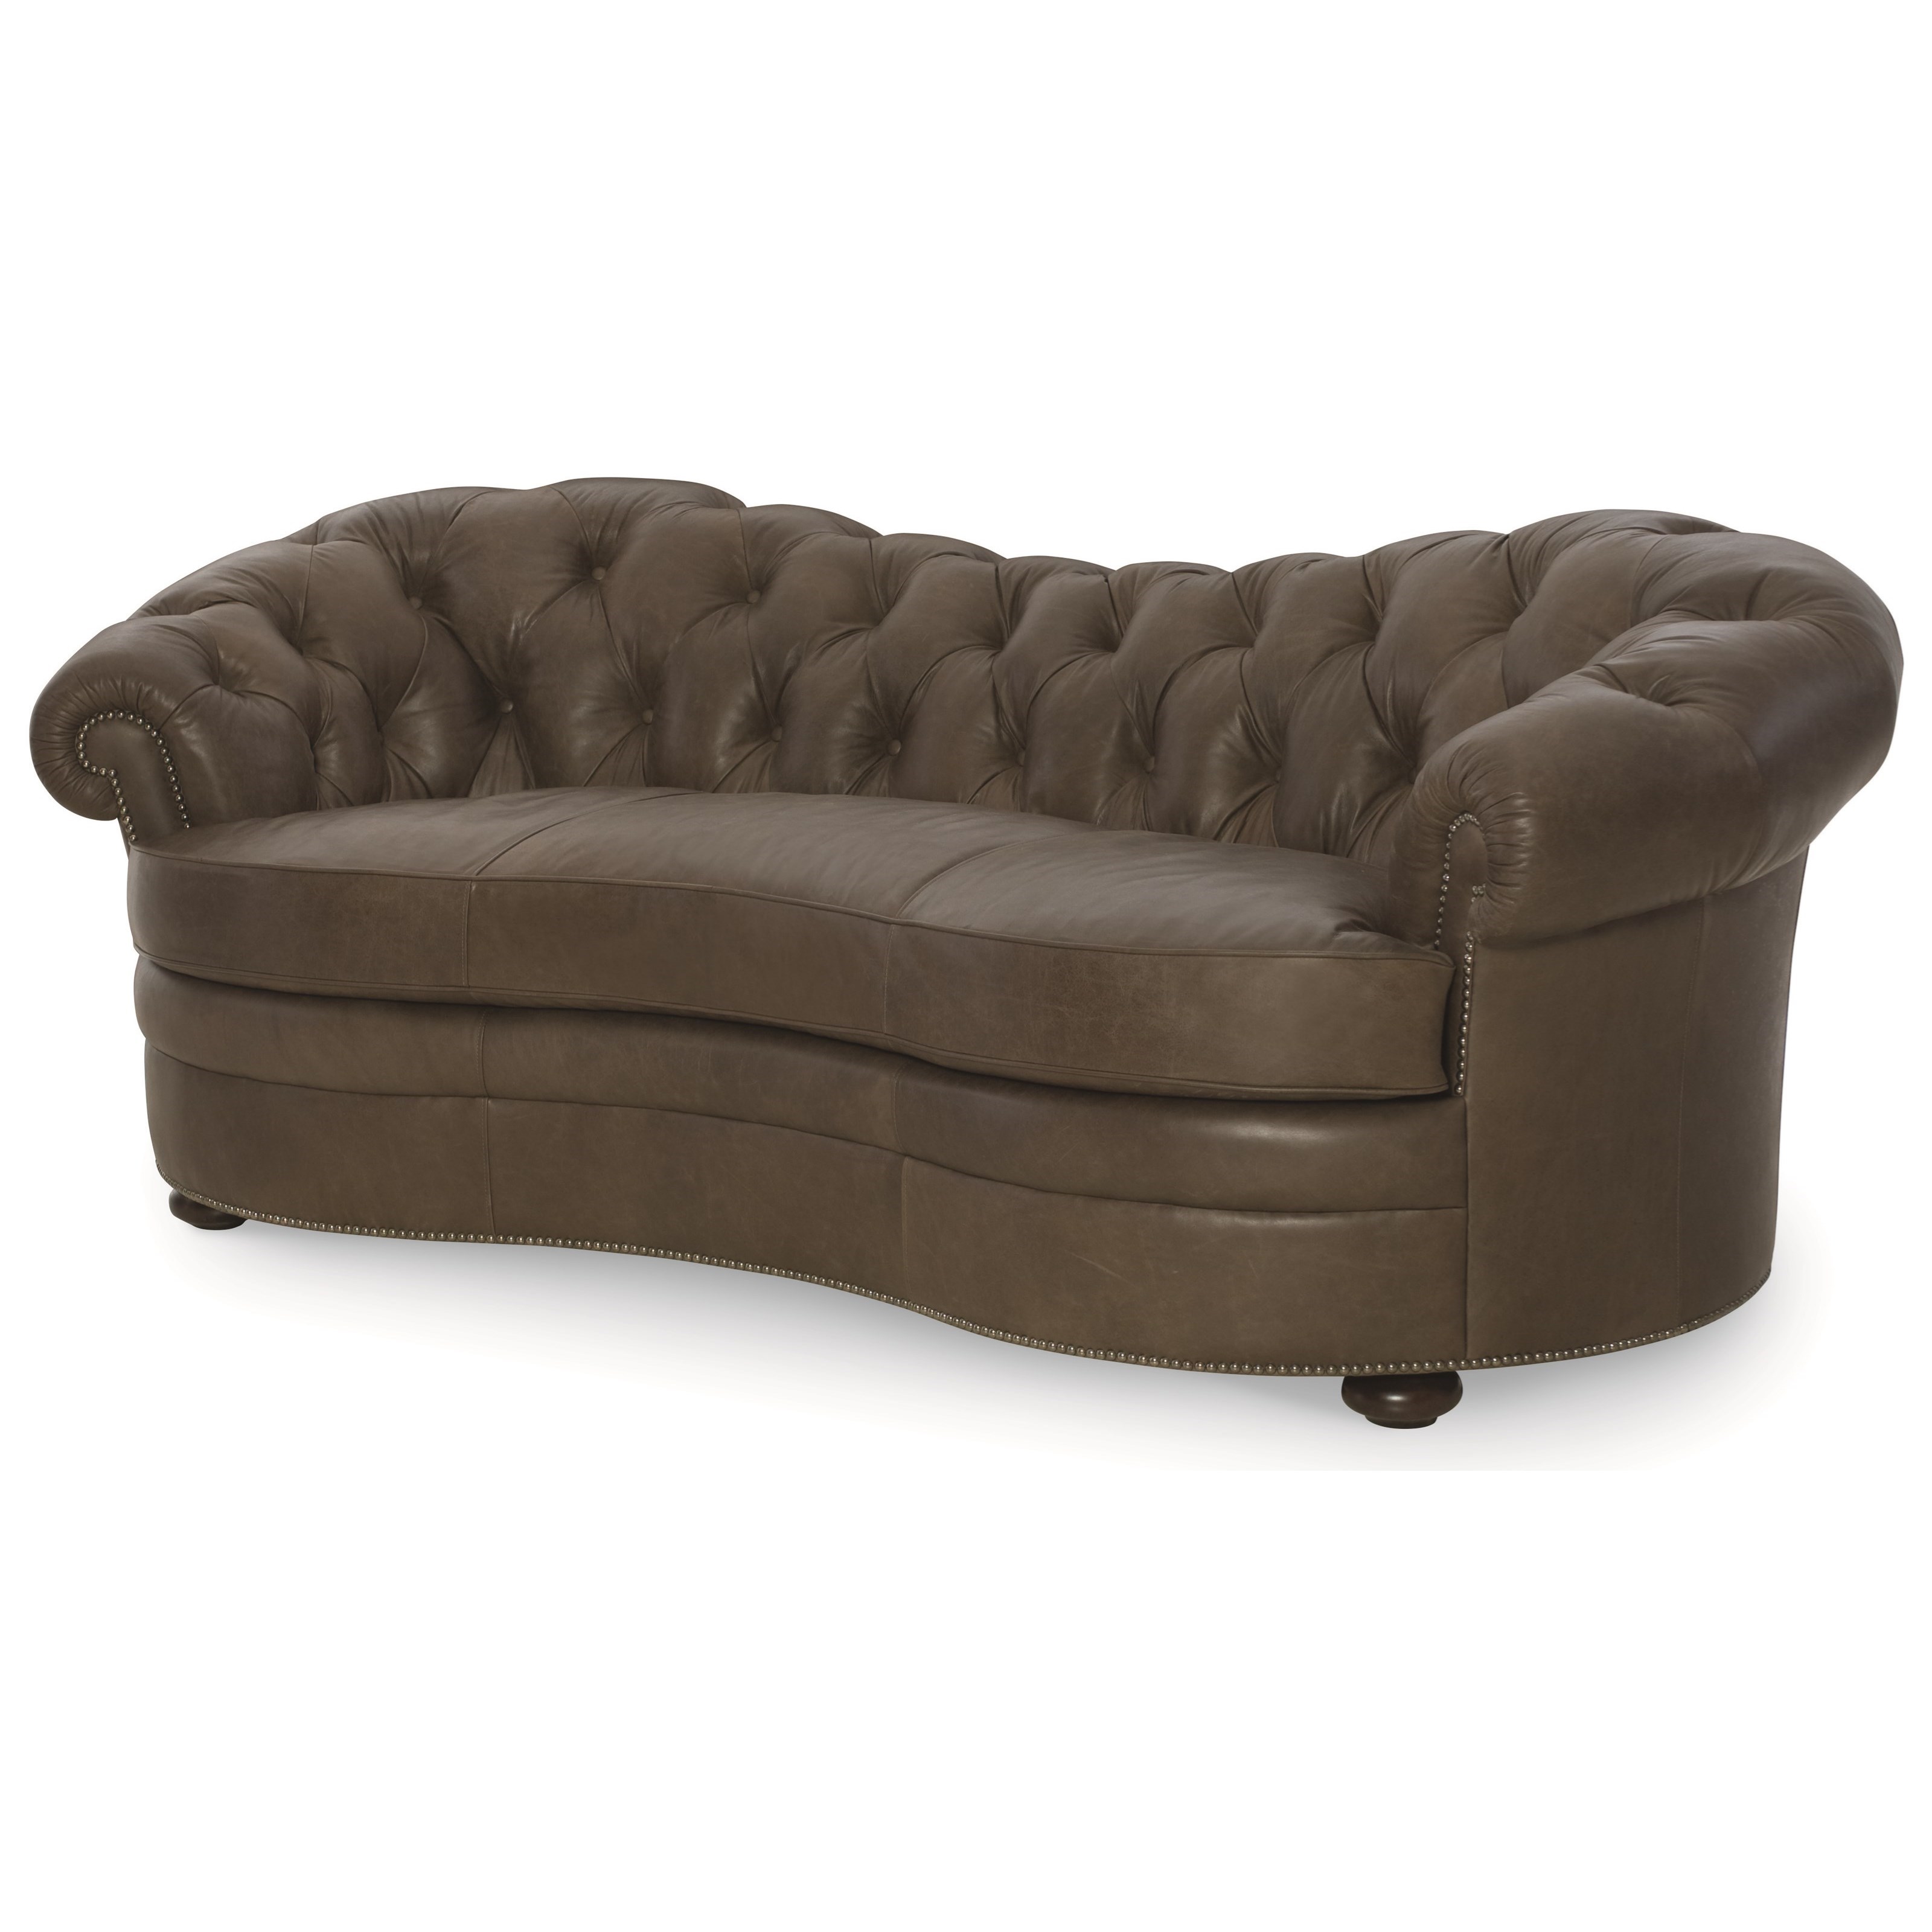 Leather Reverse Camel Back Sofa with Decorative Tufting